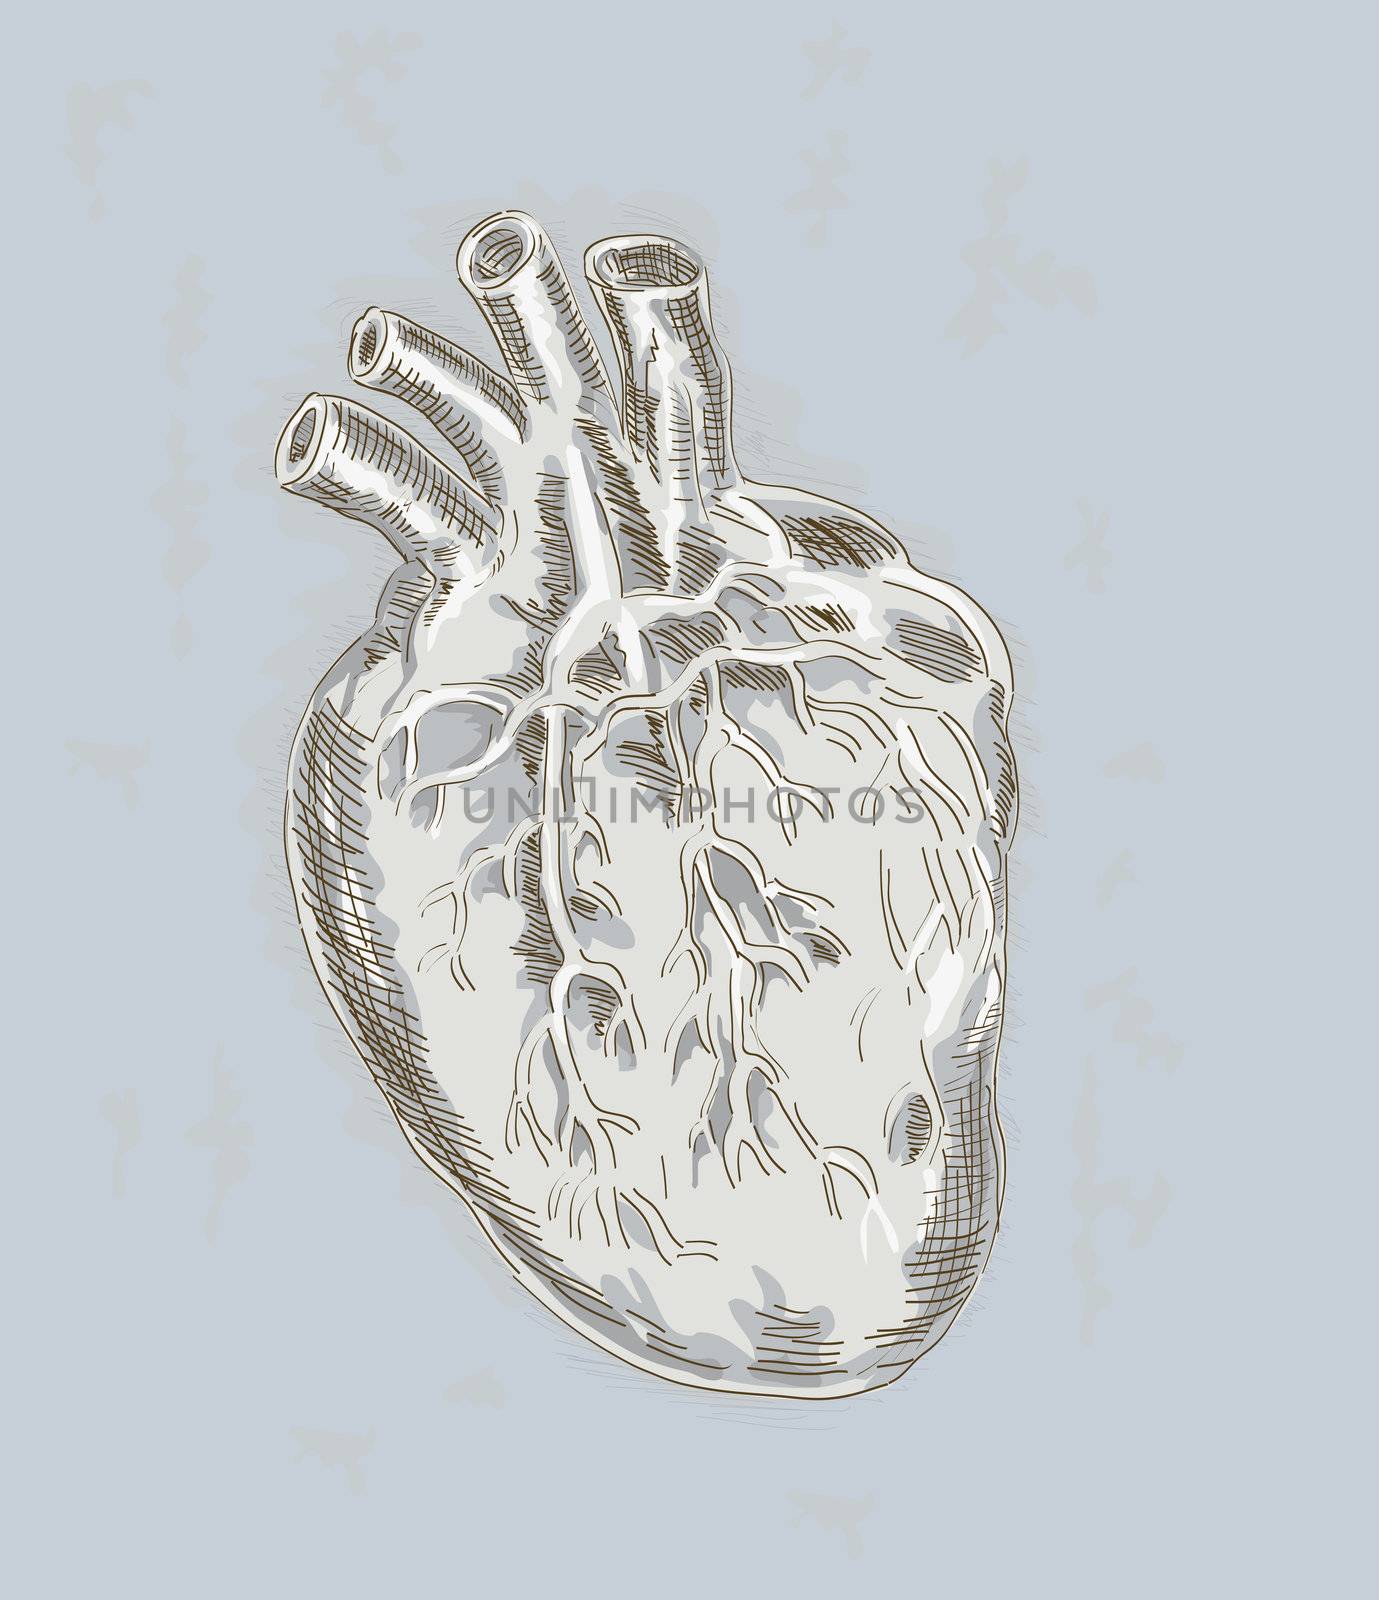 Hand sketched and drawn illustration of a Human heart